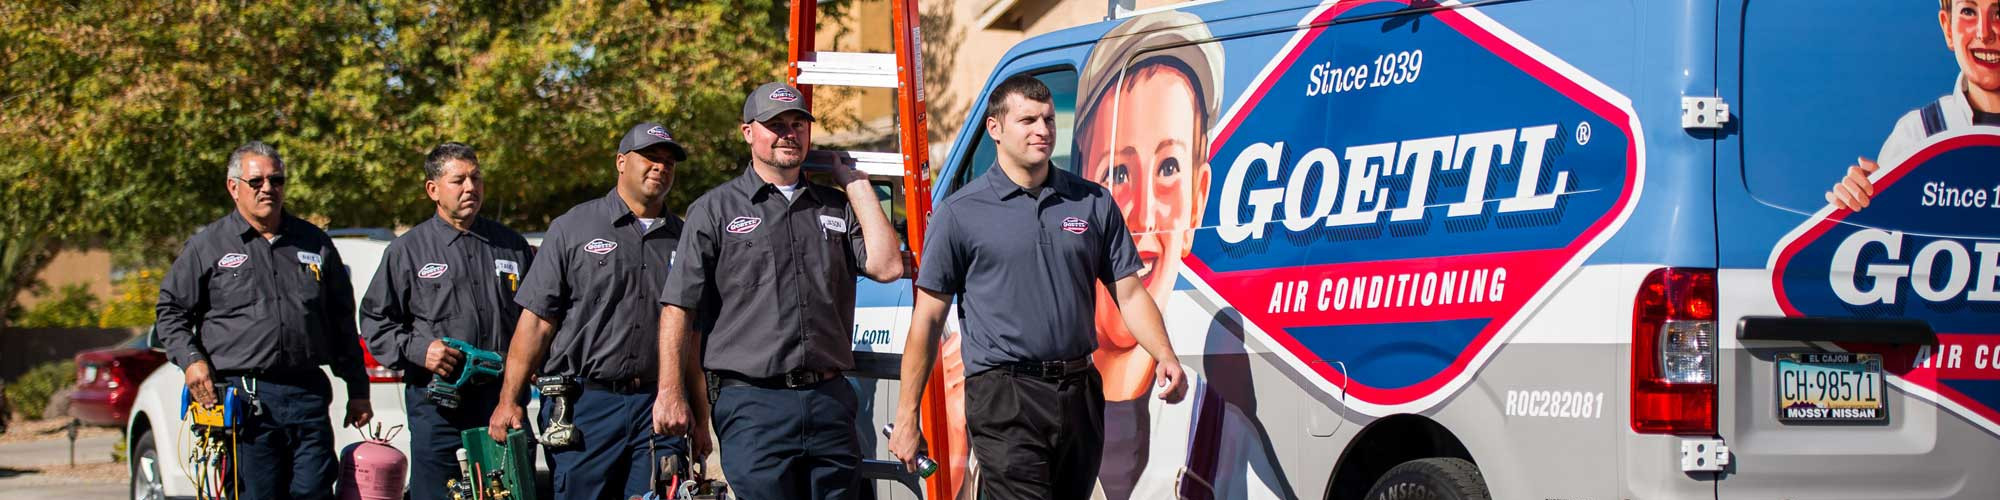 Goettl Air Conditioning and Plumbing 